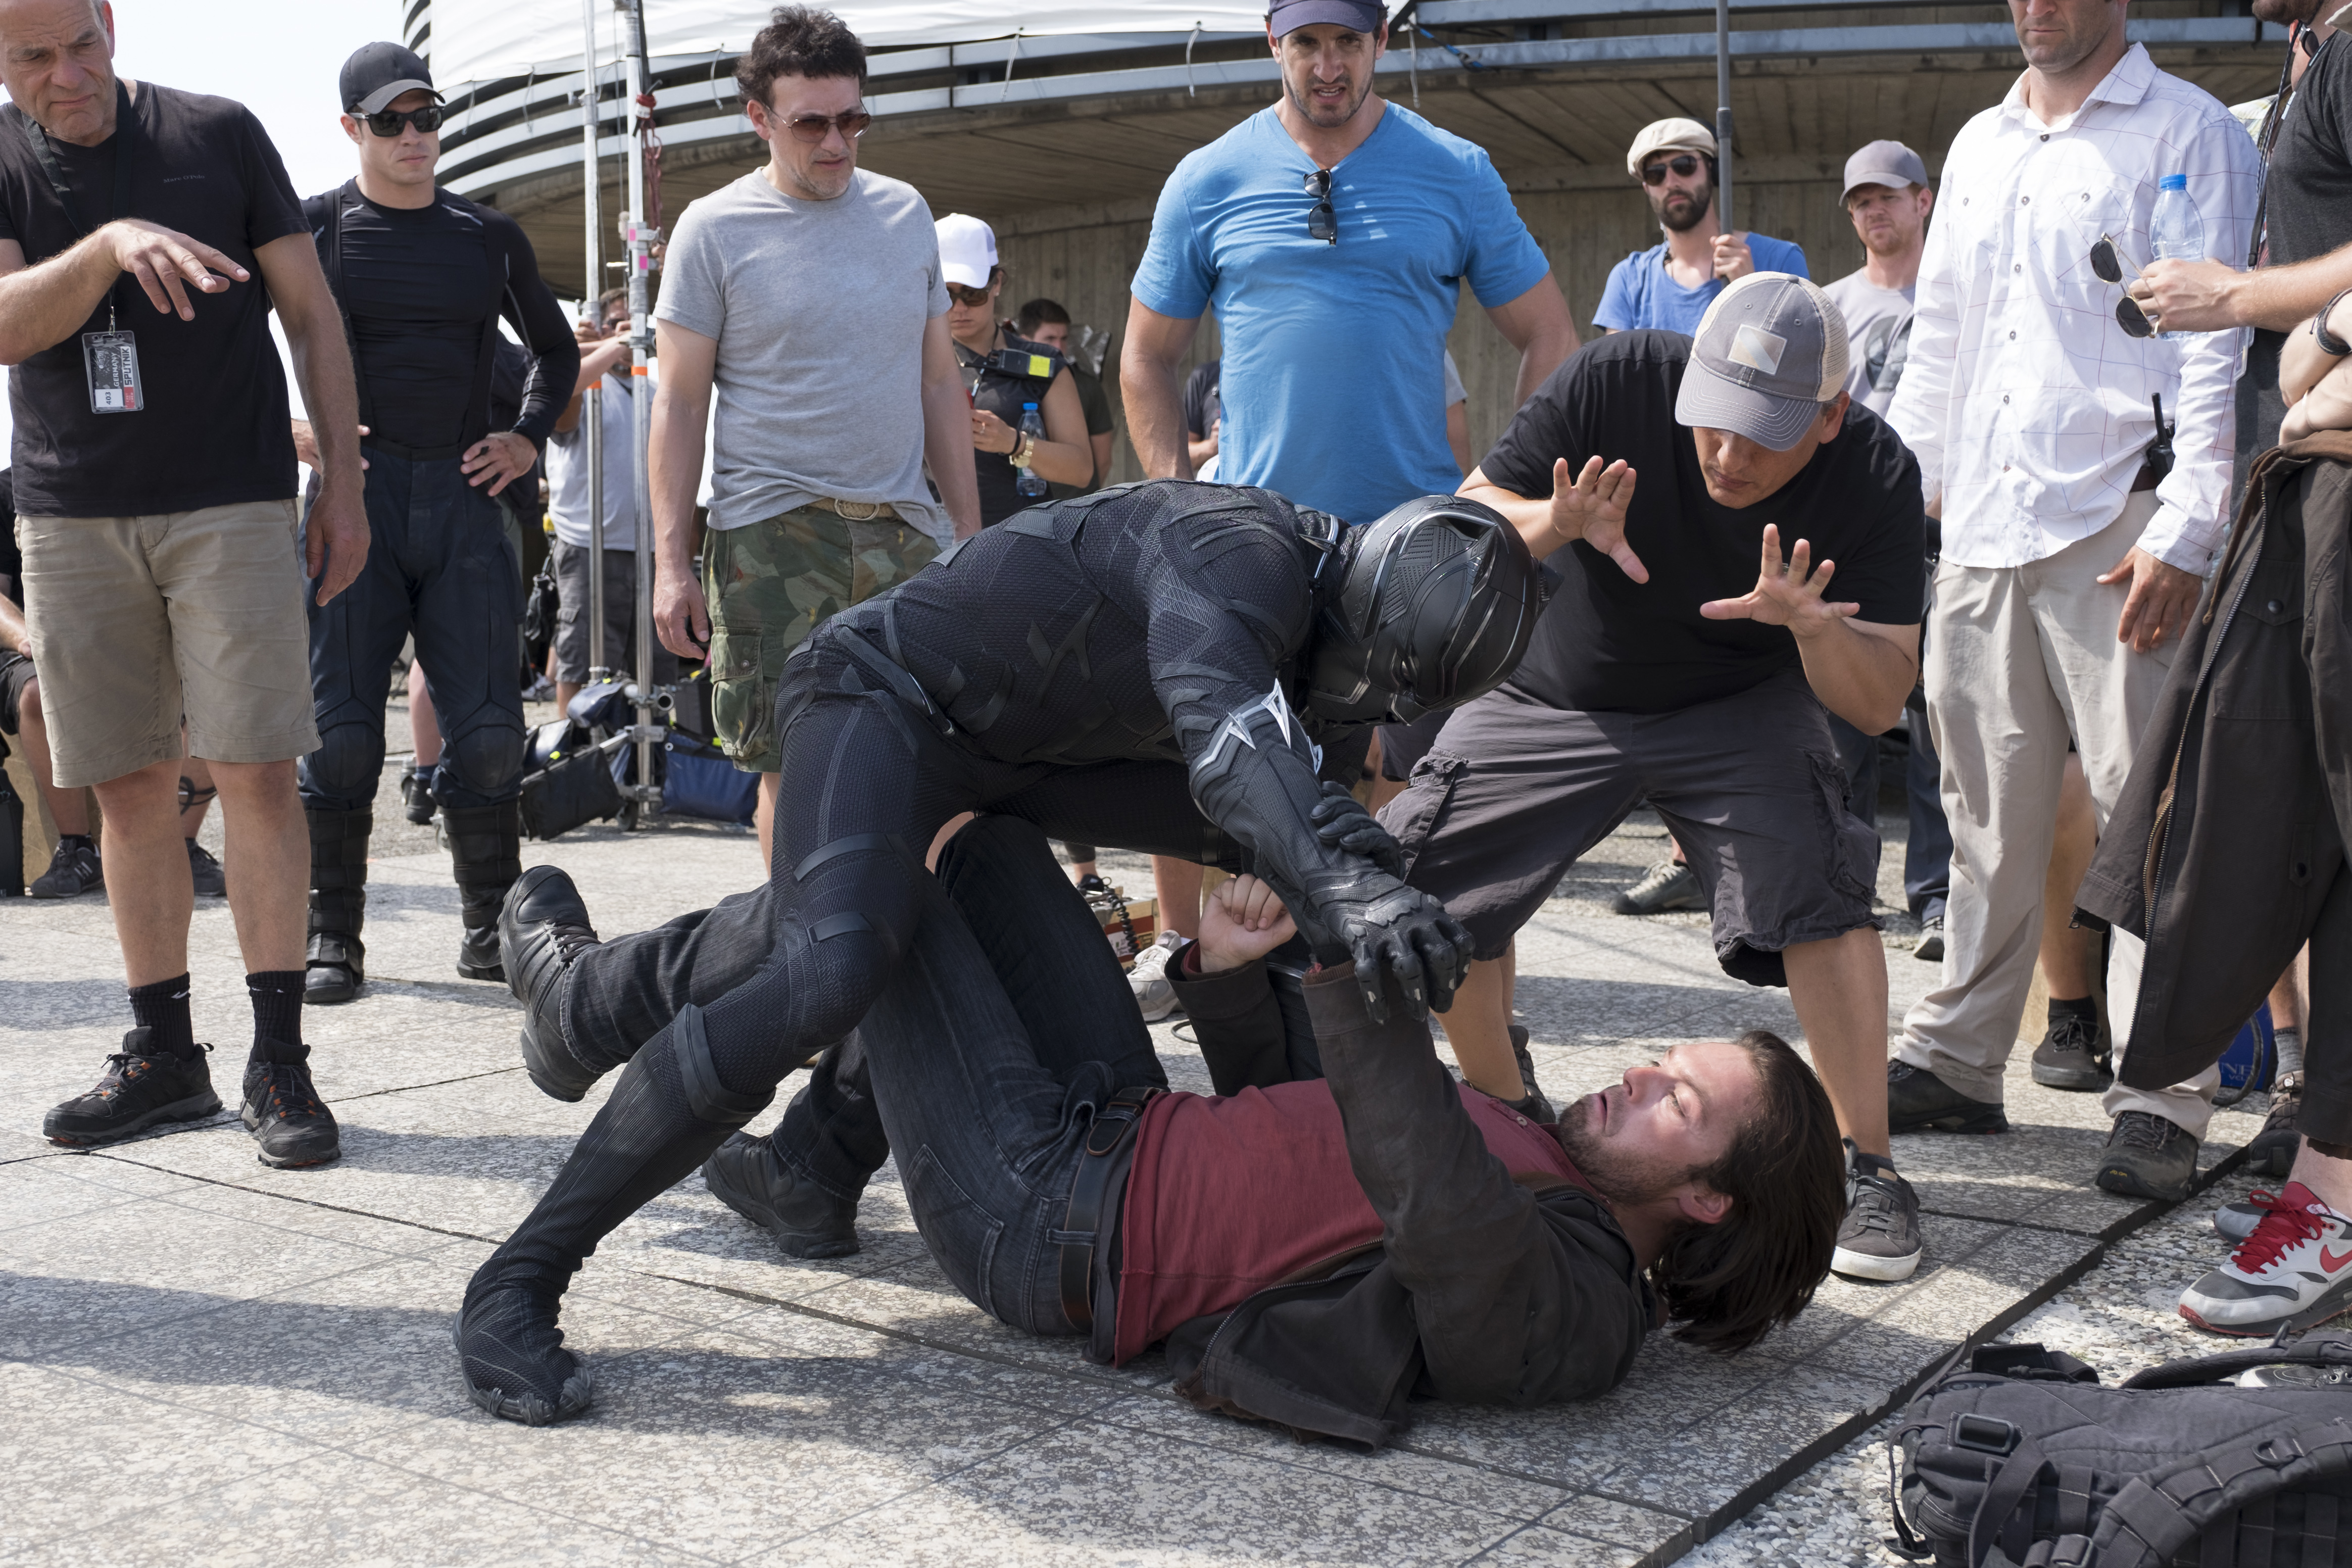 Marvel's Captain America: Civil War L to R: Director Anthony Russo, Chadwick Boseman (Black Panther), Sebastian Stan (Winter Soldier) and Director Joe Russo filming a scene on set. Photo Credit: Zade Rosenthal © Marvel 2016